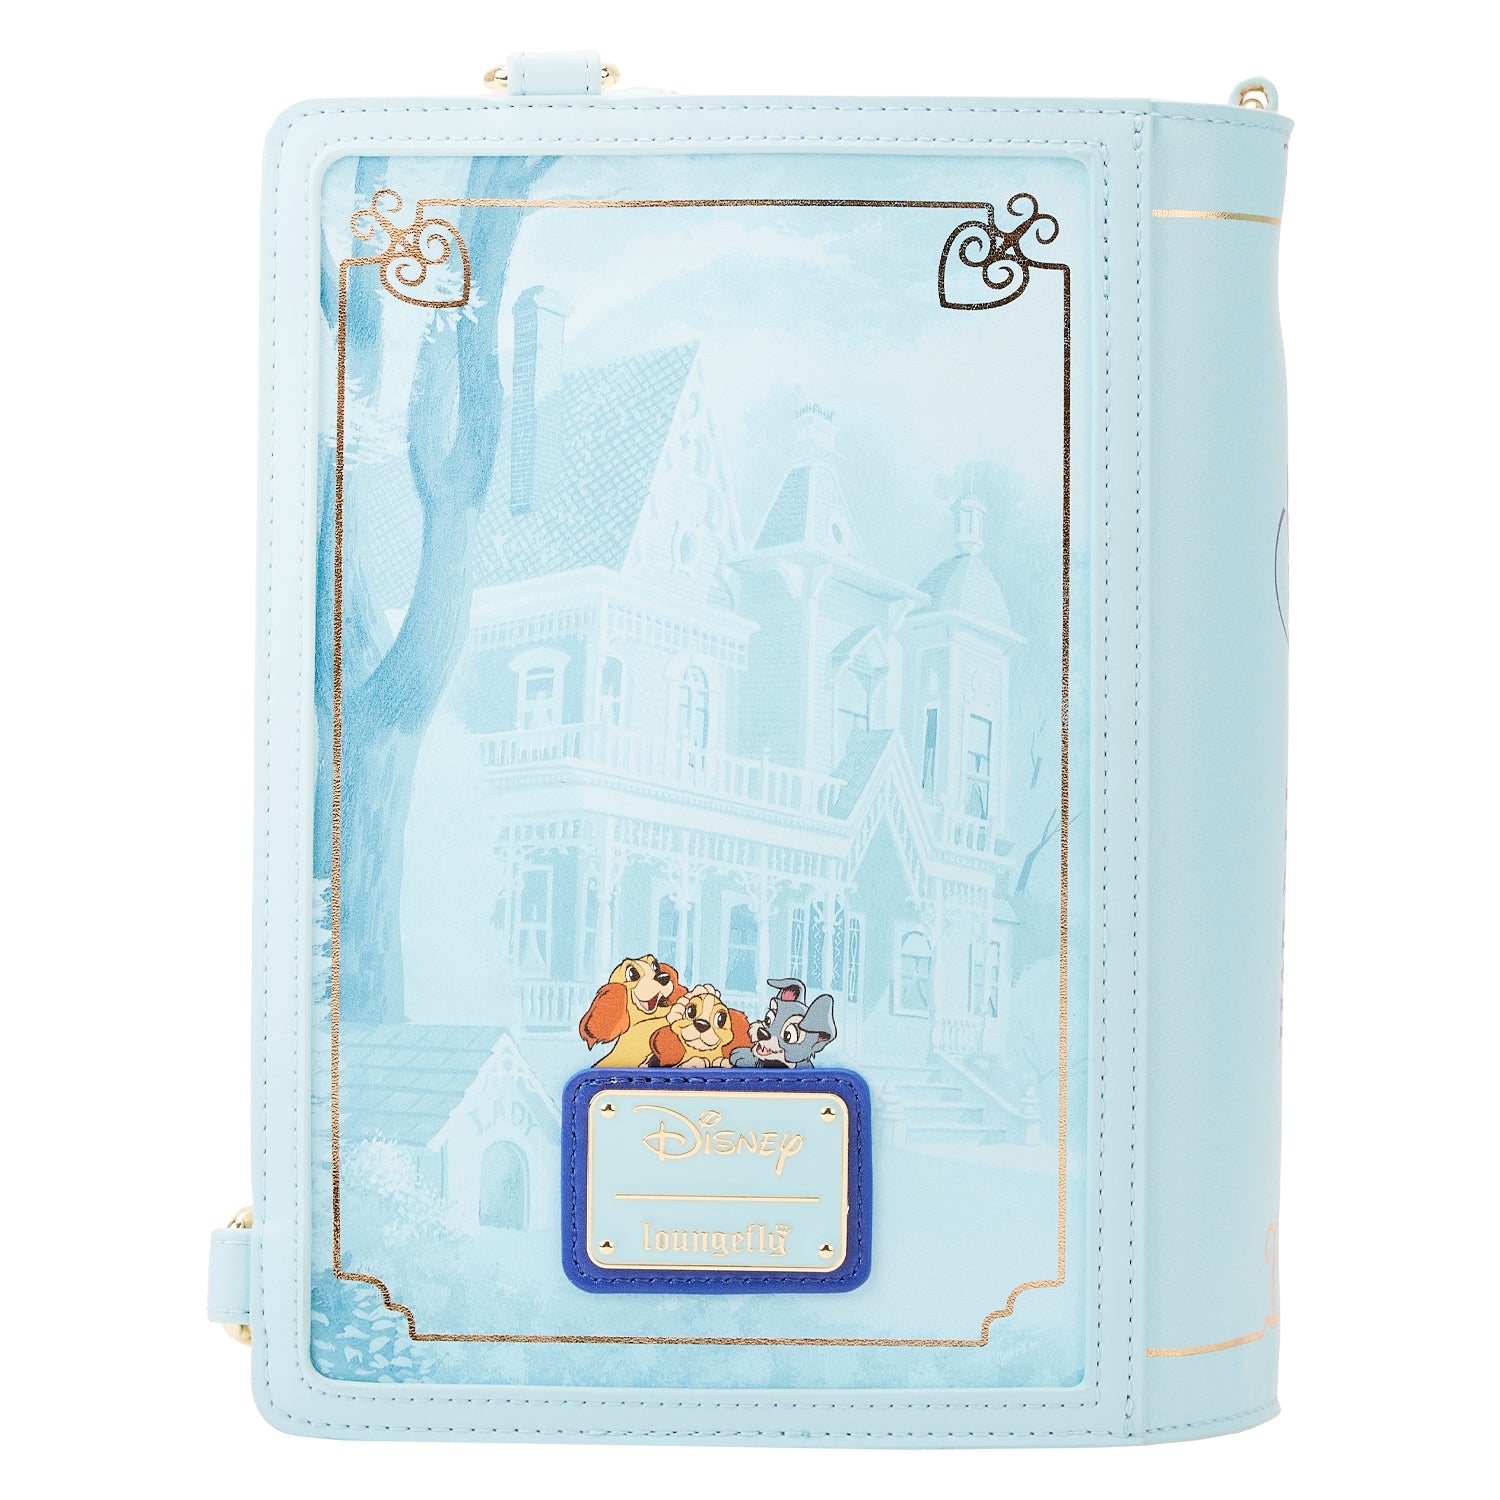 Loungefly x Disney Lady and the Tramp Book Convertible Crossbody Bag - GeekCore